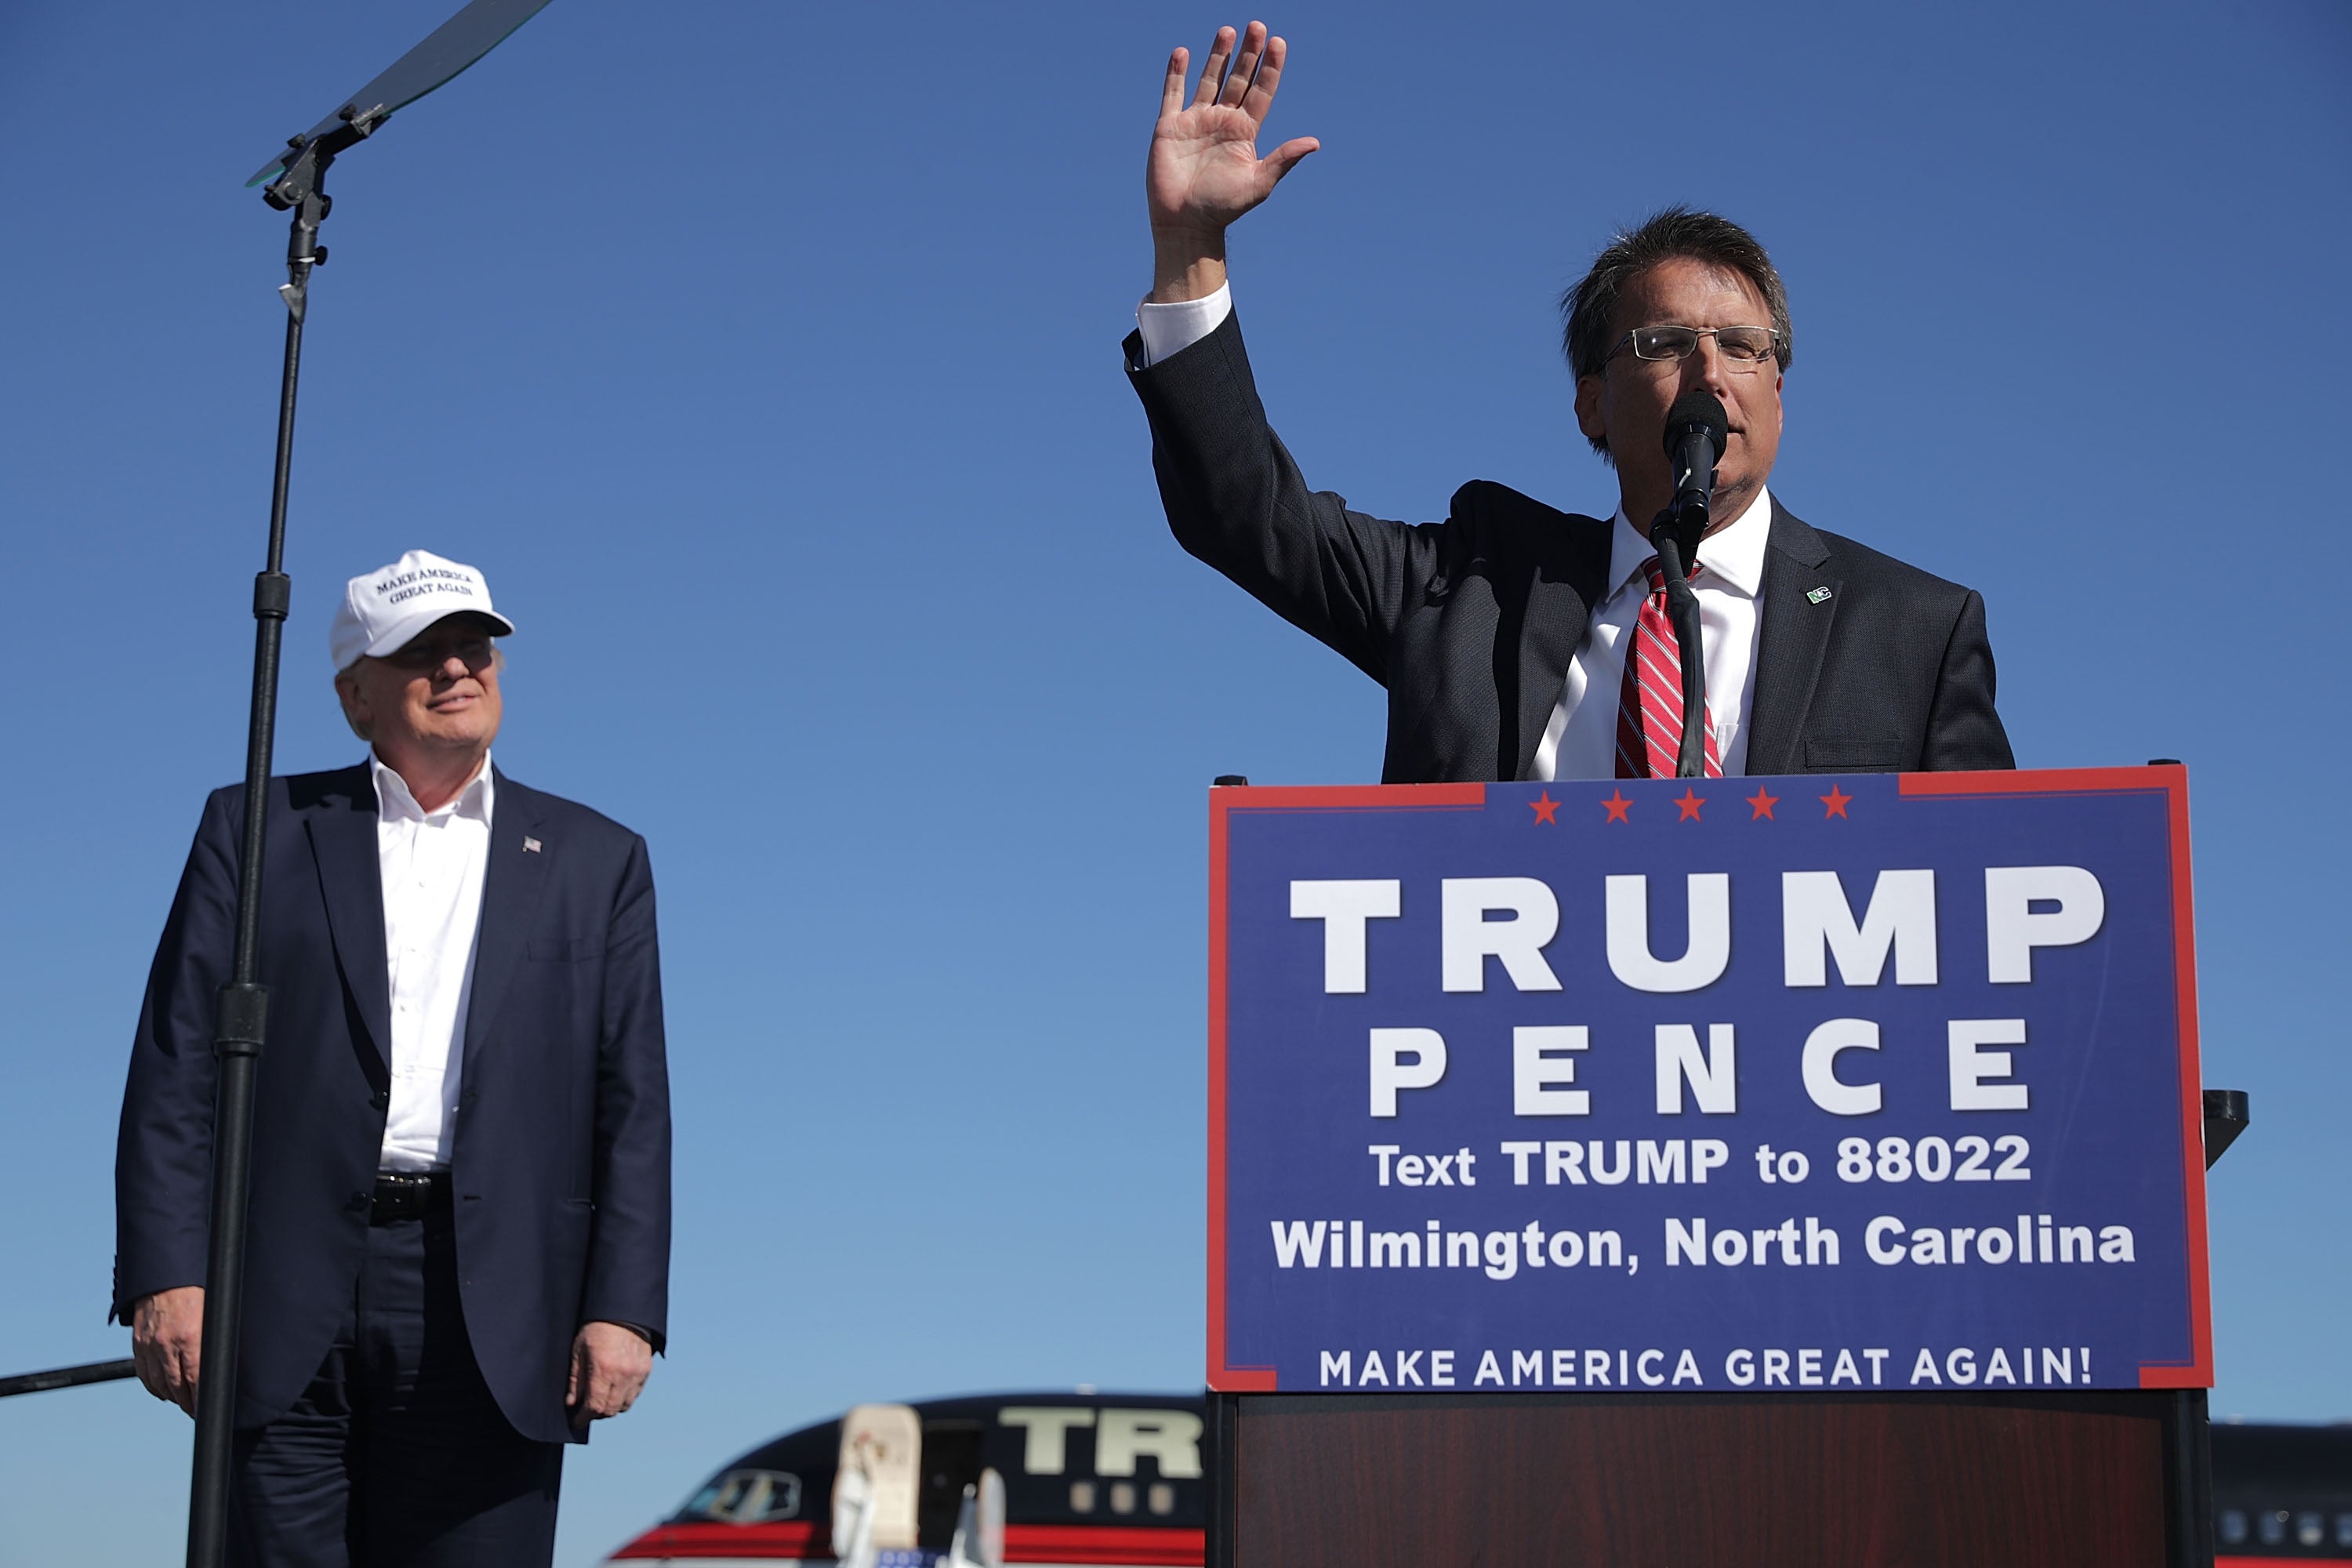 In 2016, former Gov Pat McCrory (R-NC) campaigned with Donald Trump. Now, Mr Trump supported his primary challenger in North Carolina’s Senate race.